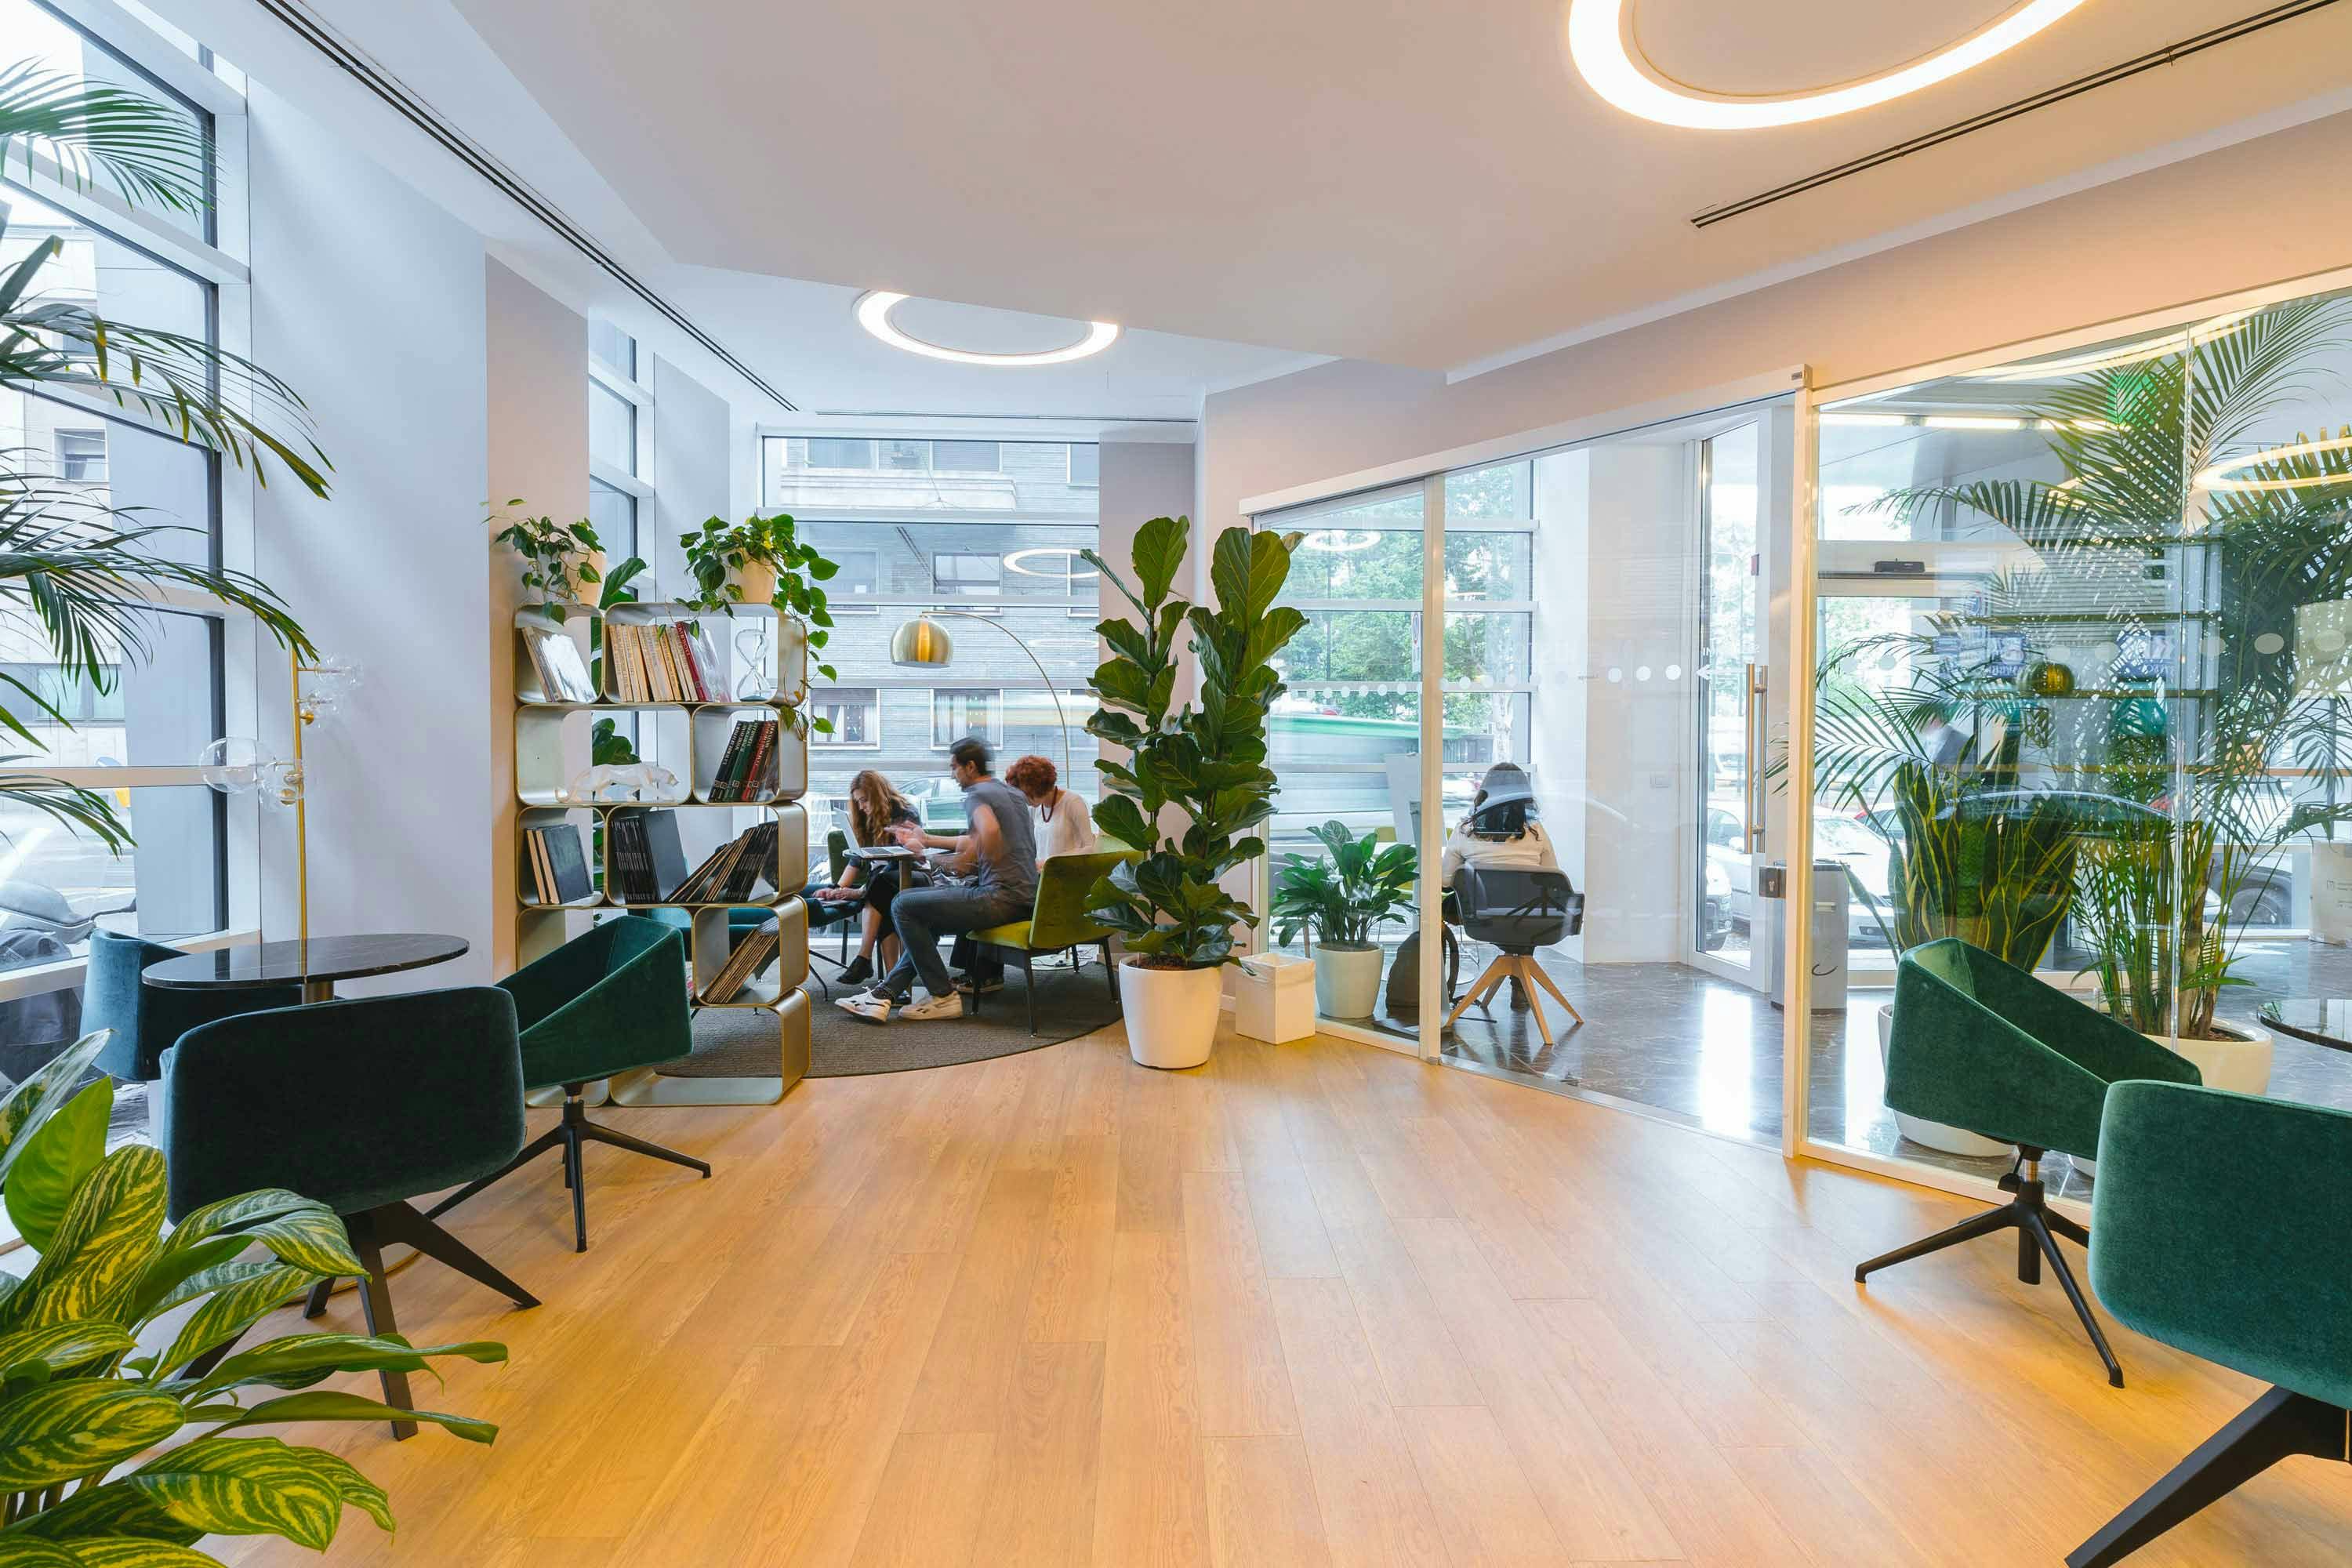 We connect forward-thinking teams to serviced offices in London